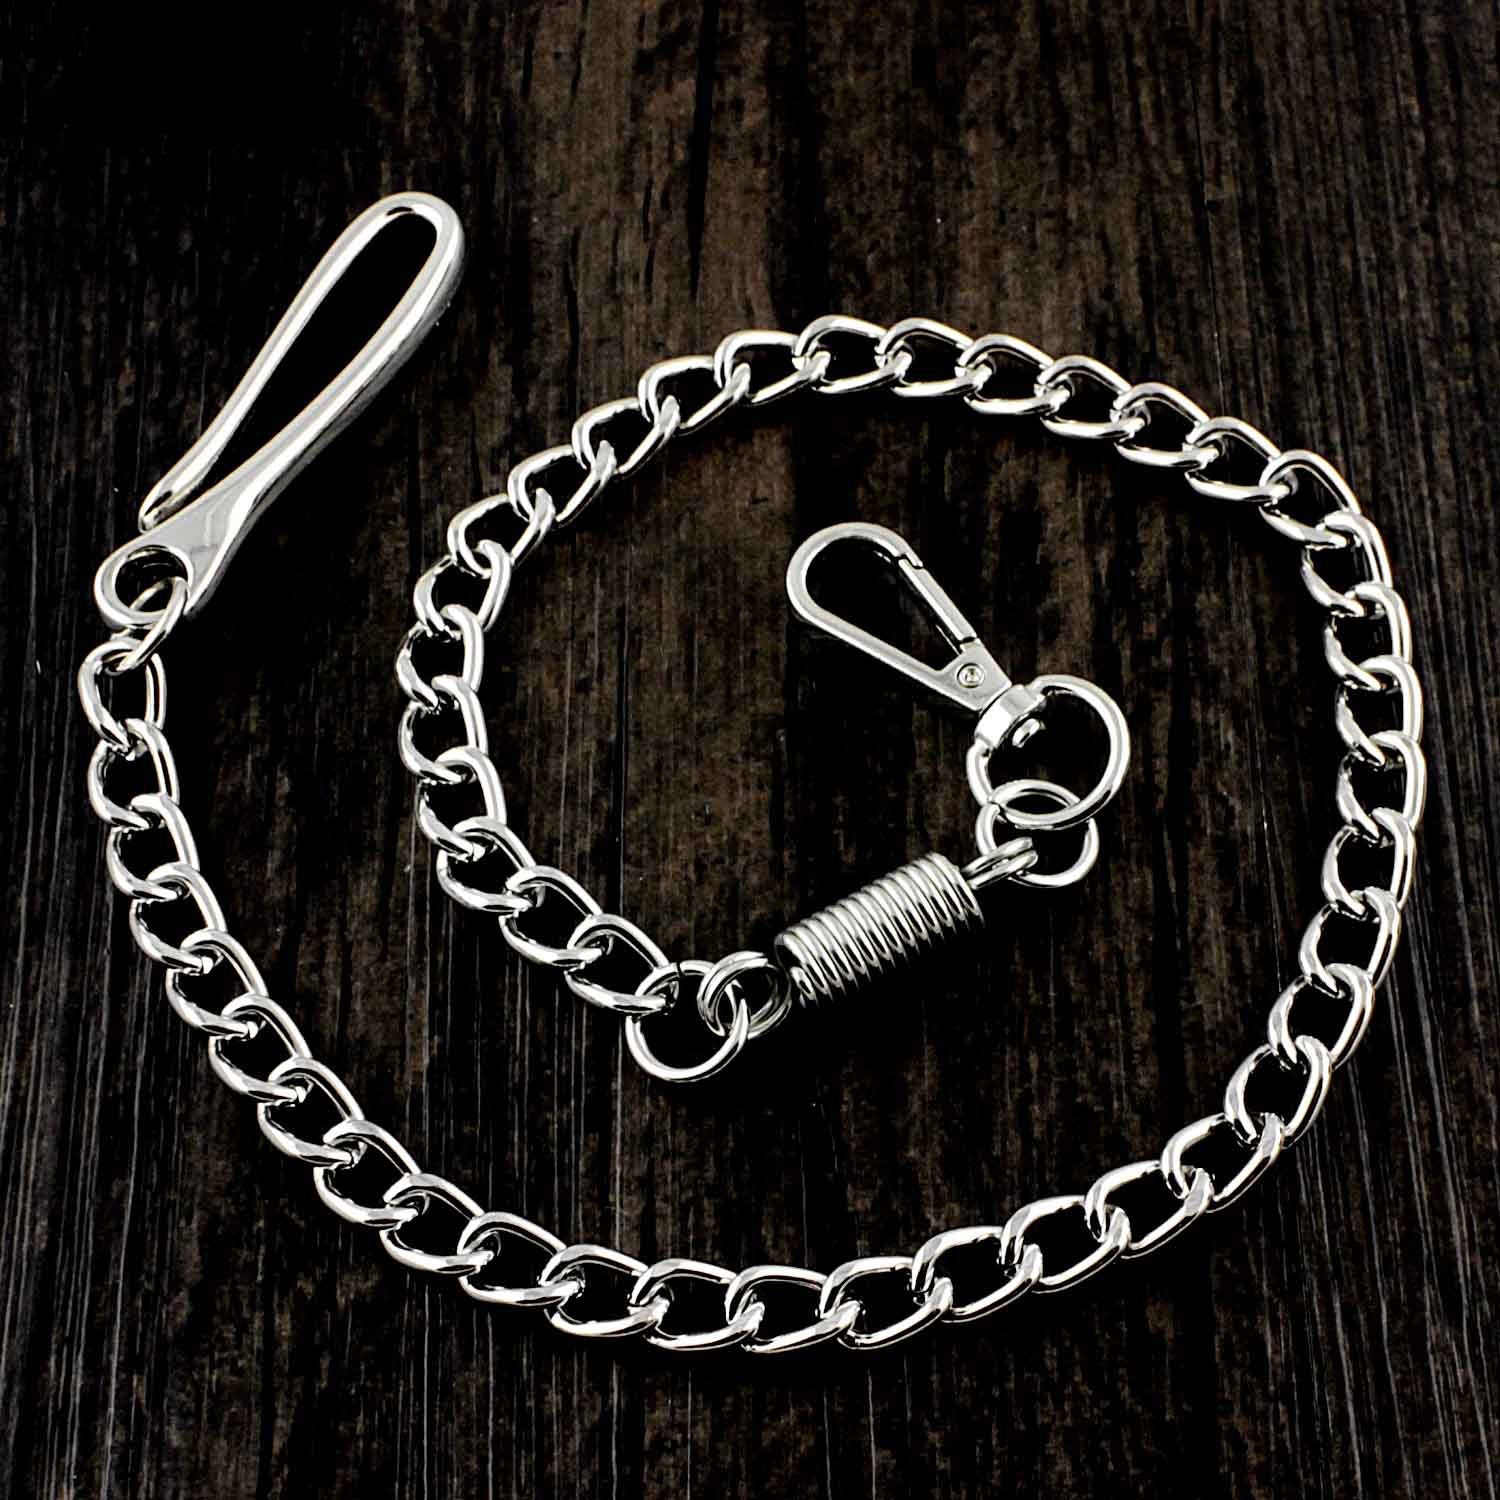 Cool Silver Stainless Steel Mens Biker Wallet Chain Wallet Chain Pants ...